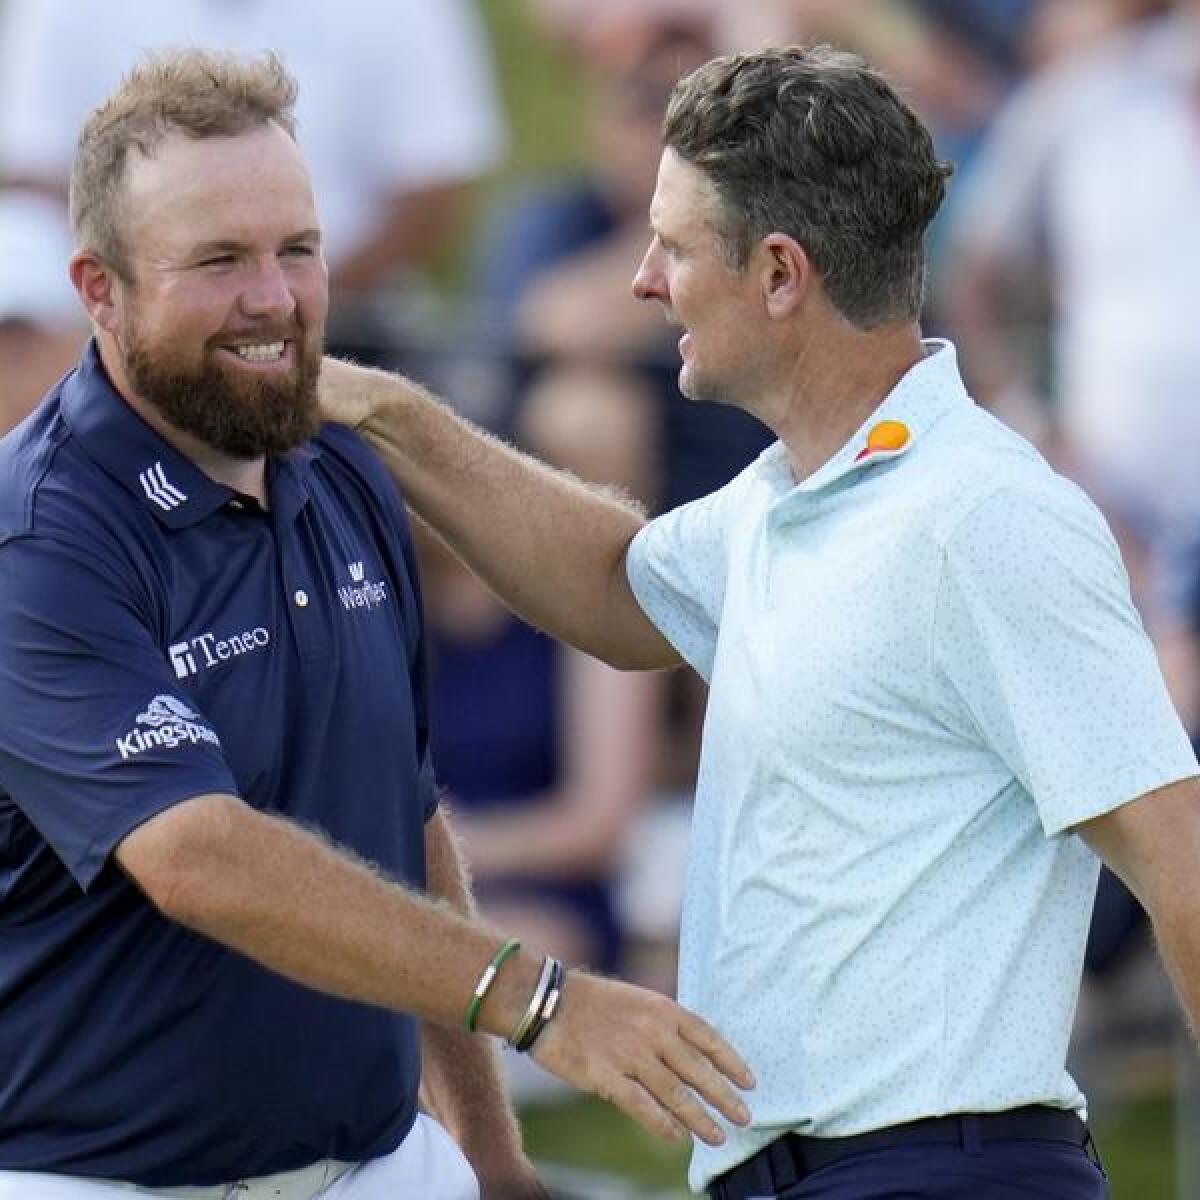 Shane Lowry (L) and Justin Rose